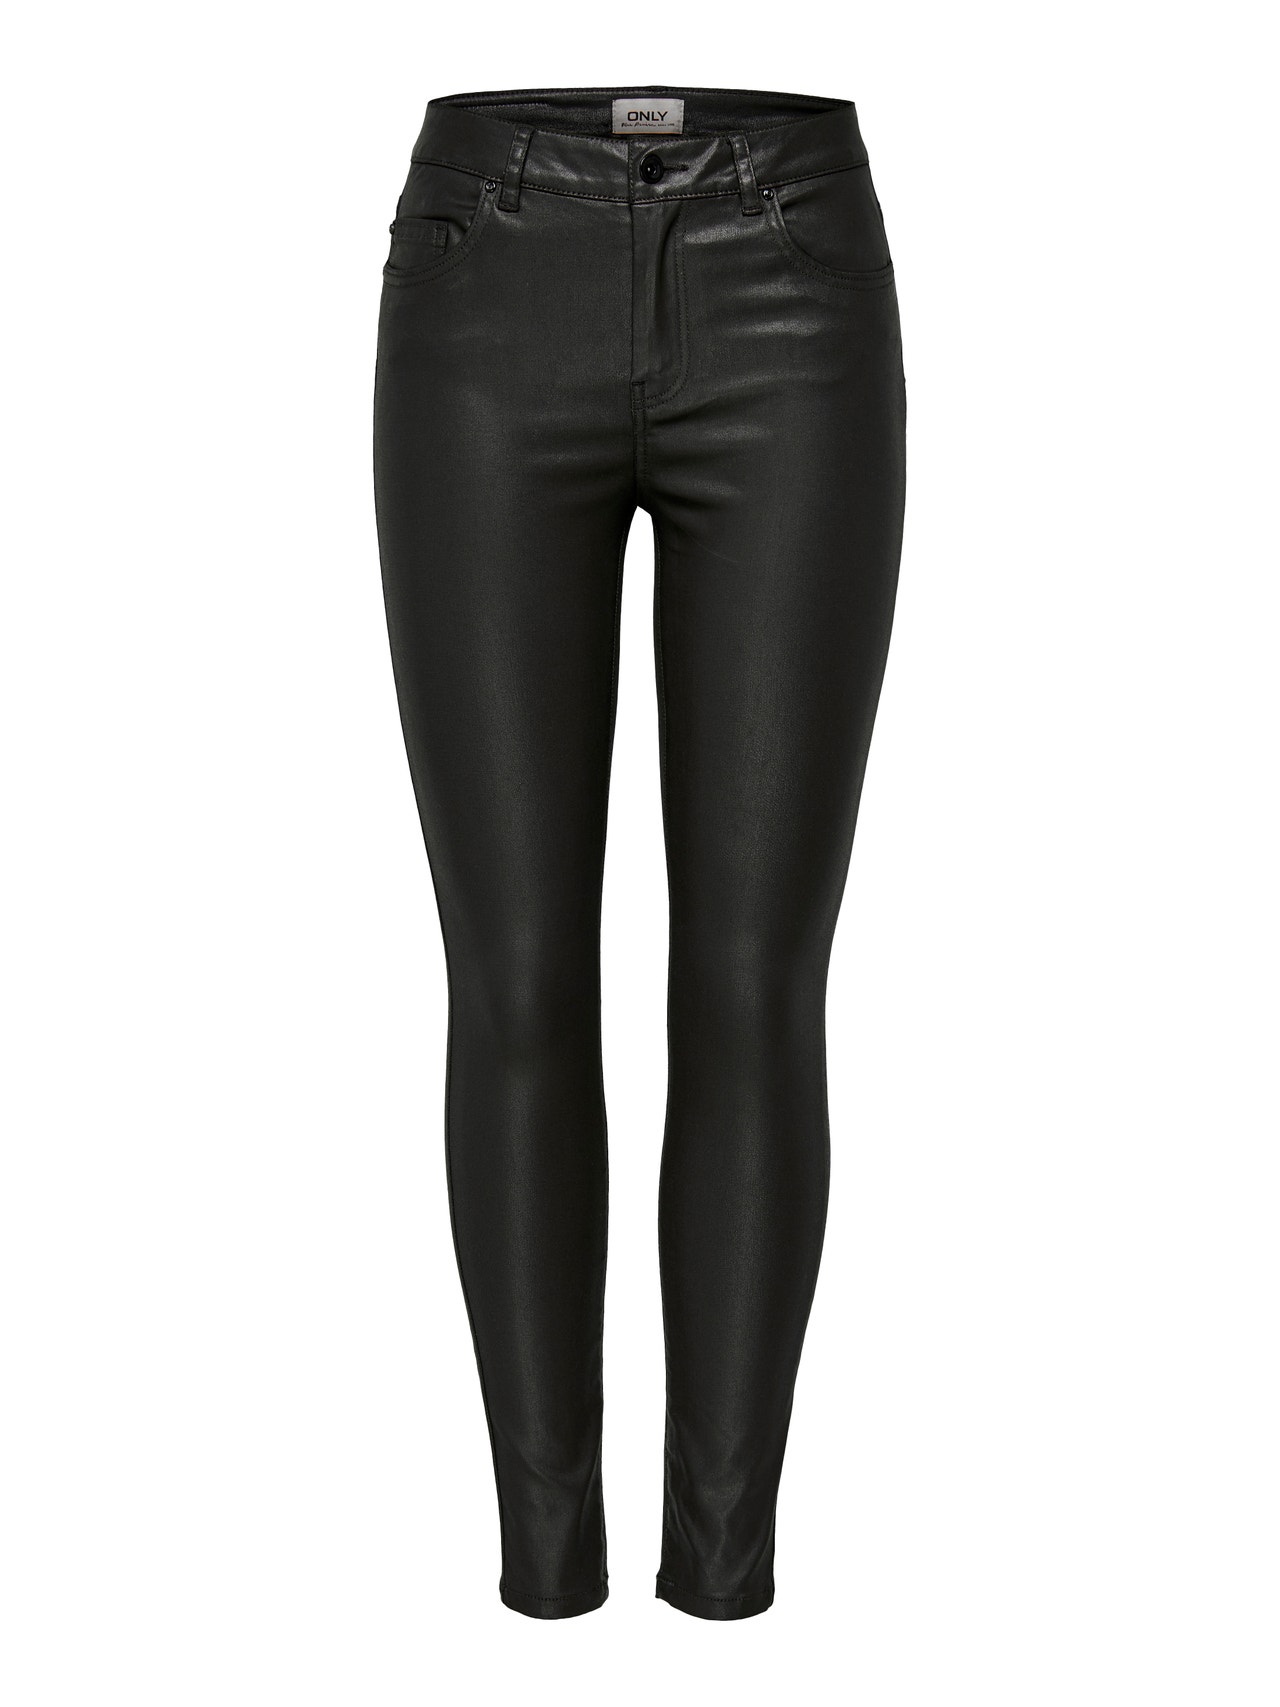 ONLY Pantalons Skinny Fit Taille moyenne -Black - 15182330